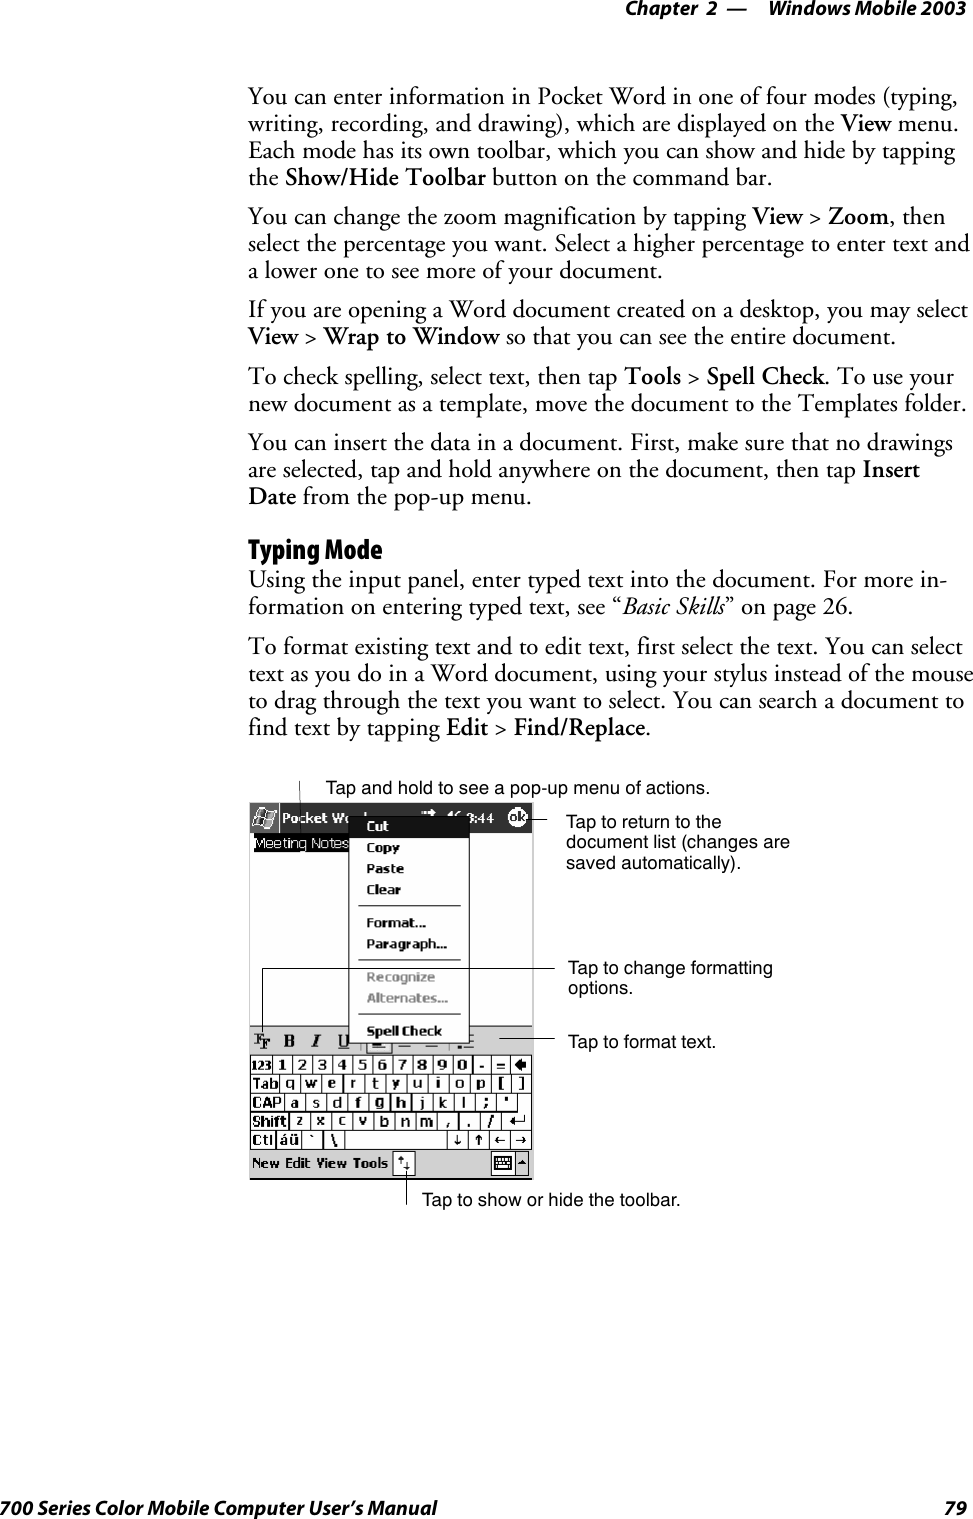 Windows Mobile 2003—Chapter 279700 Series Color Mobile Computer User’s ManualYou can enter information in Pocket Word in one of four modes (typing,writing, recording, and drawing), which are displayed on the View menu.Each mode has its own toolbar, which you can show and hide by tappingthe Show/Hide Toolbar button on the command bar.You can change the zoom magnification by tapping View &gt;Zoom,thenselect the percentage you want. Select a higher percentage to enter text anda lower one to see more of your document.If you are opening a Word document created on a desktop, you may selectView &gt;Wrap to Window so that you can see the entire document.To check spelling, select text, then tap Tools &gt;Spell Check.Touseyournew document as a template, move the document to the Templates folder.You can insert the data in a document. First, make sure that no drawingsare selected, tap and hold anywhere on the document, then tap InsertDate from the pop-up menu.Typing ModeUsing the input panel, enter typed text into the document. For more in-formation on entering typed text, see “Basic Skills” on page 26.To format existing text and to edit text, first select the text. You can selecttext as you do in a Word document, using your stylus instead of the mouseto drag through the text you want to select. You can search a document tofind text by tapping Edit &gt;Find/Replace.Tap to show or hide the toolbar.Tap to change formattingoptions.Taptoformattext.Taptoreturntothedocument list (changes aresaved automatically).Tap and hold to see a pop-up menu of actions.